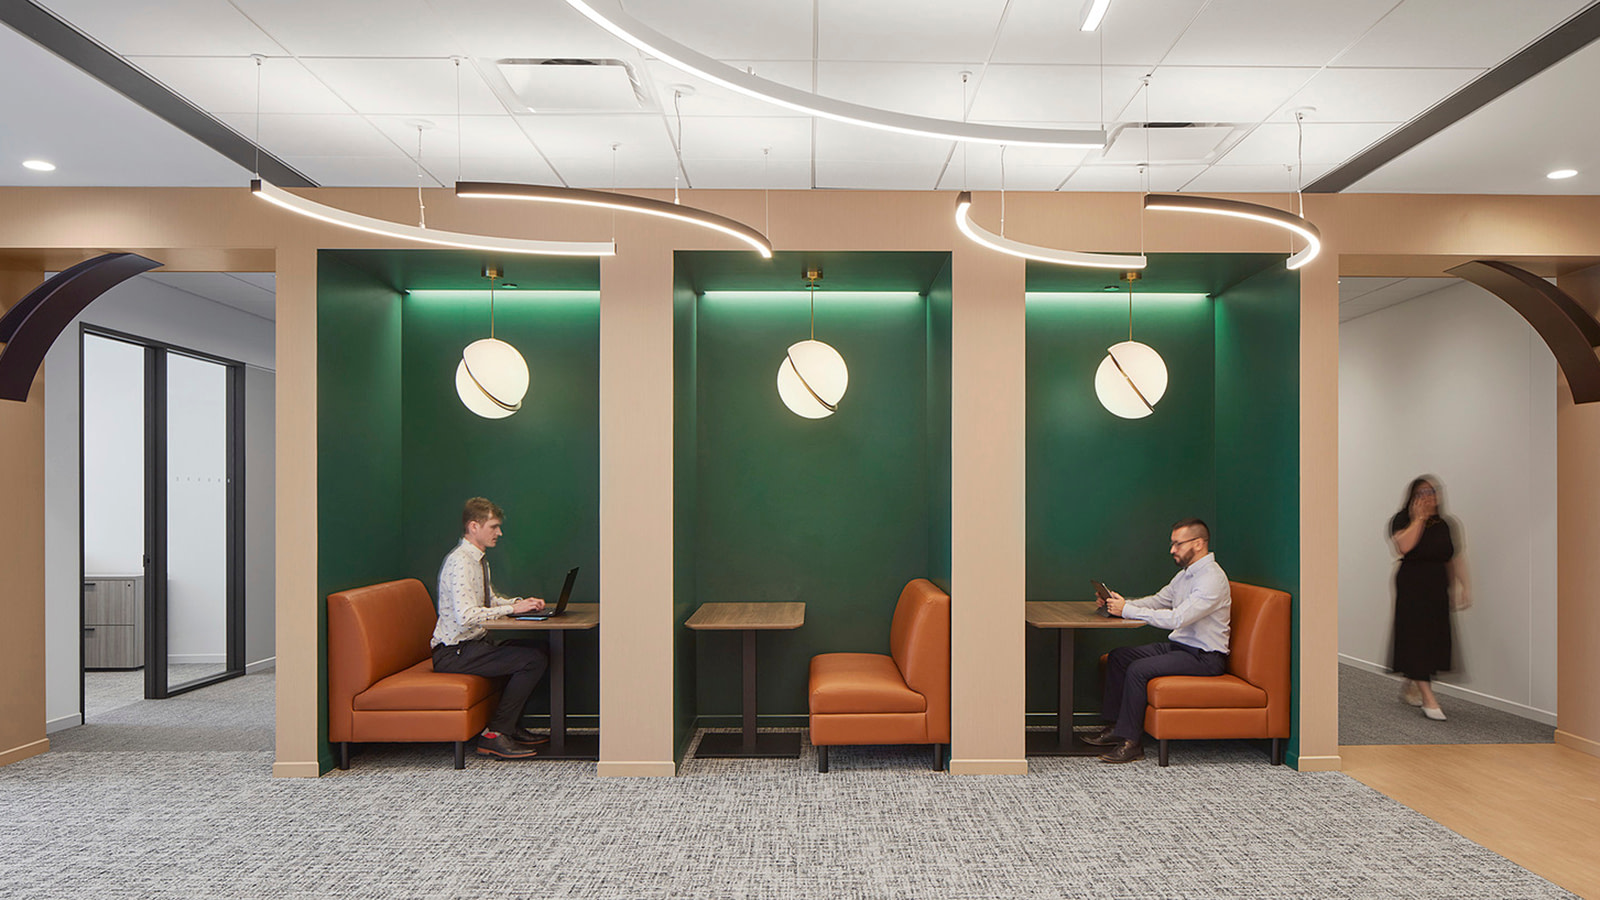 Activity-based work settings at Faegre Drinker's Chicago offices, designed by IA Interior Architects